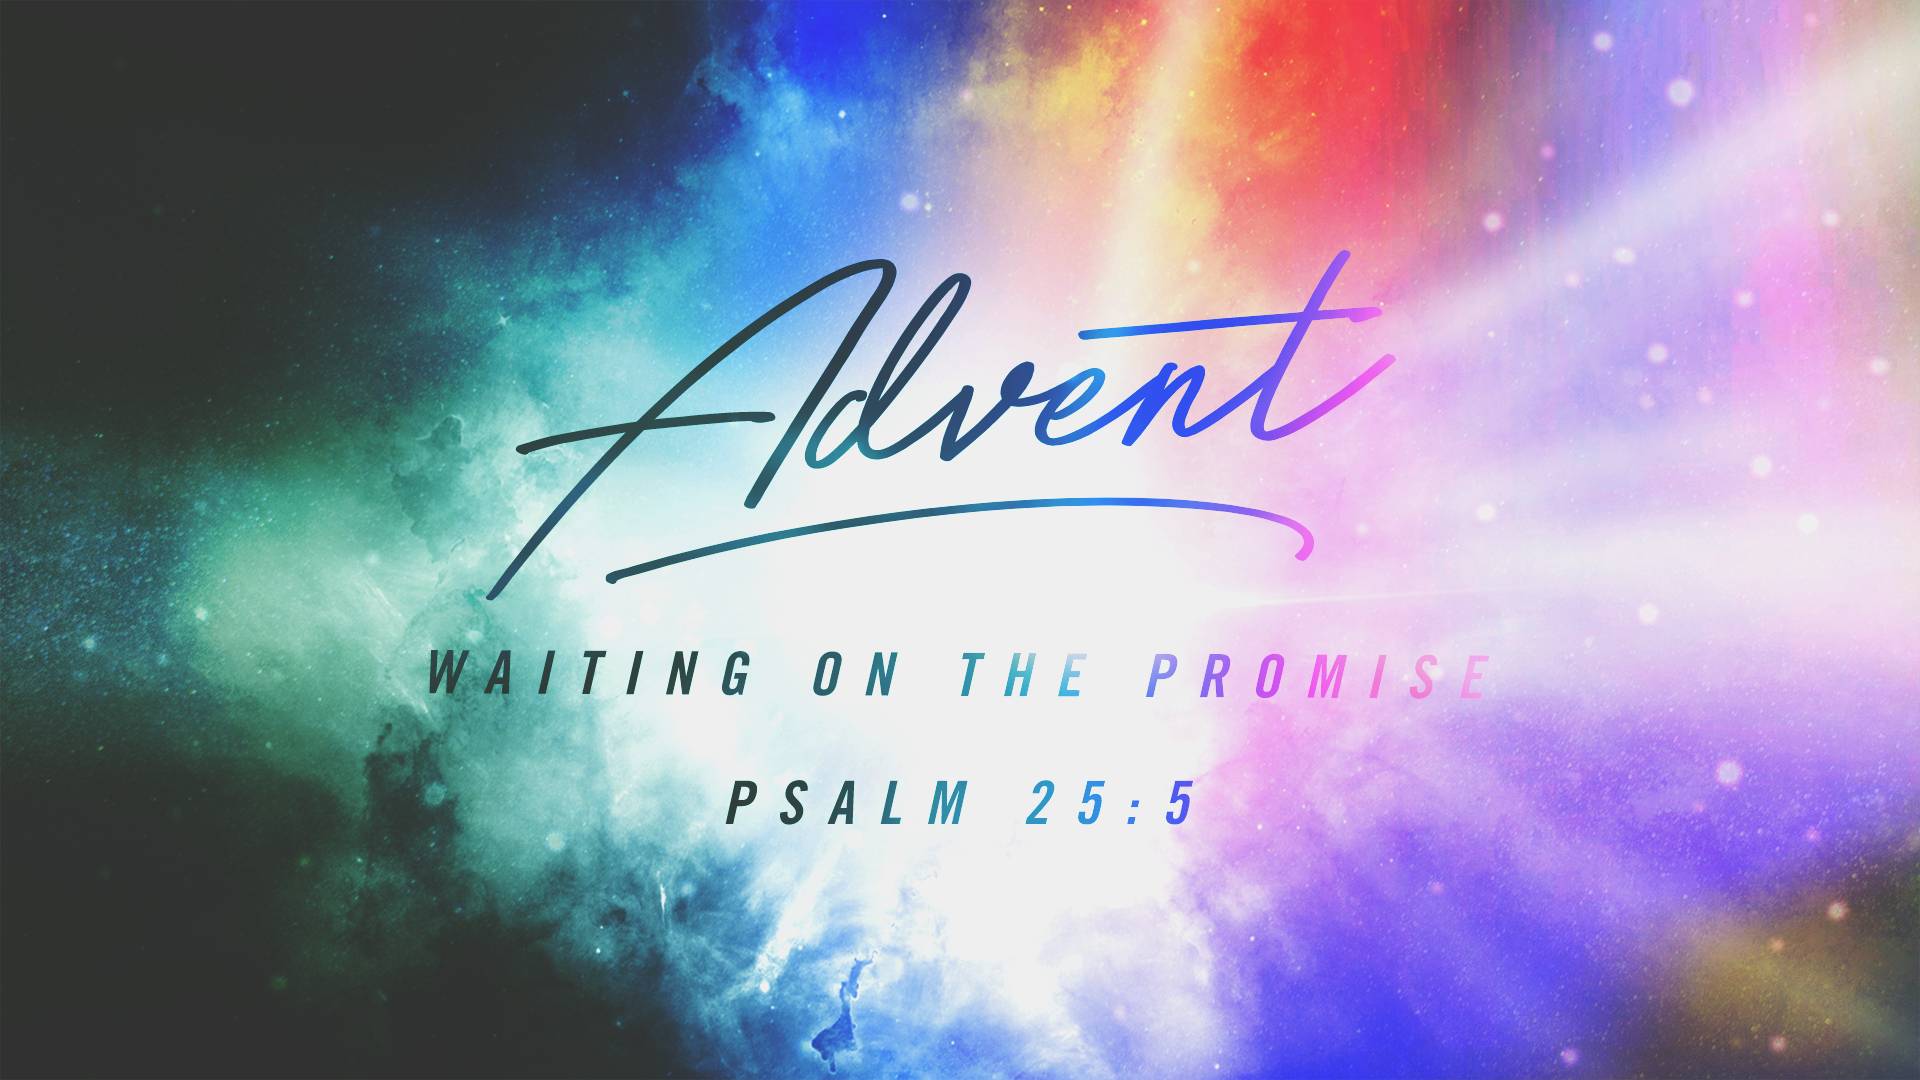 The Promise of God's Presence